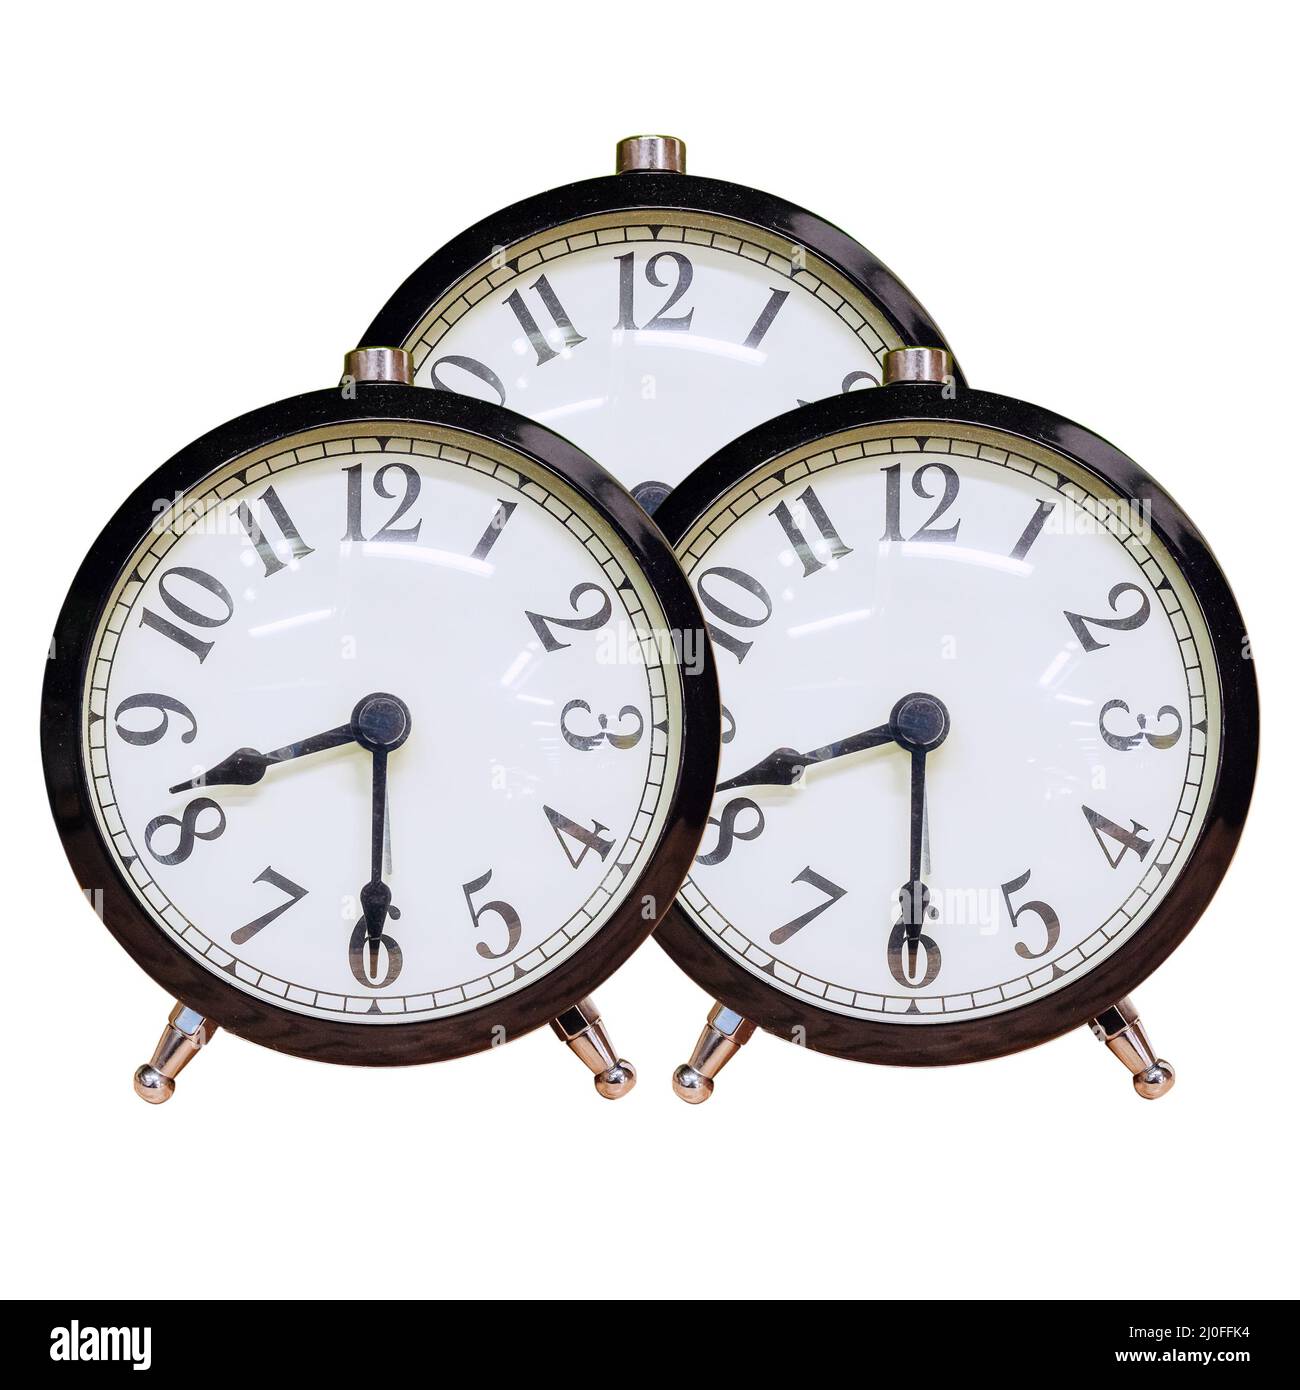 Three identical alarm clocks with white dial and black numbers on an isolated background Stock Photo